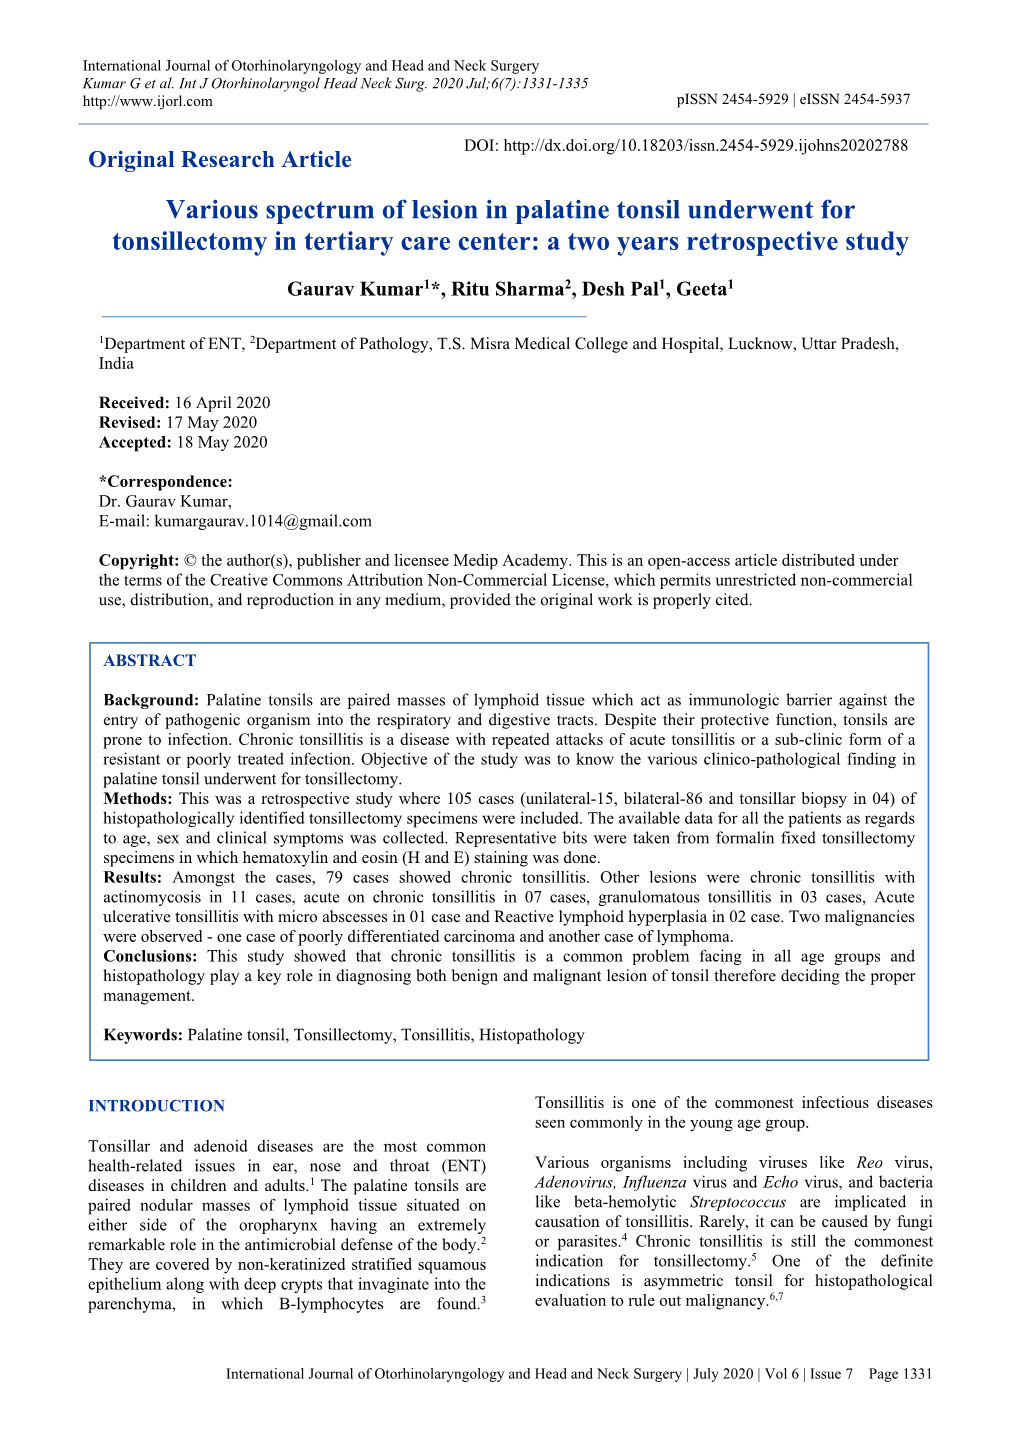 Various Spectrum of Lesion in Palatine Tonsil Underwent for Tonsillectomy in Tertiary Care Center: a Two Years Retrospective Study